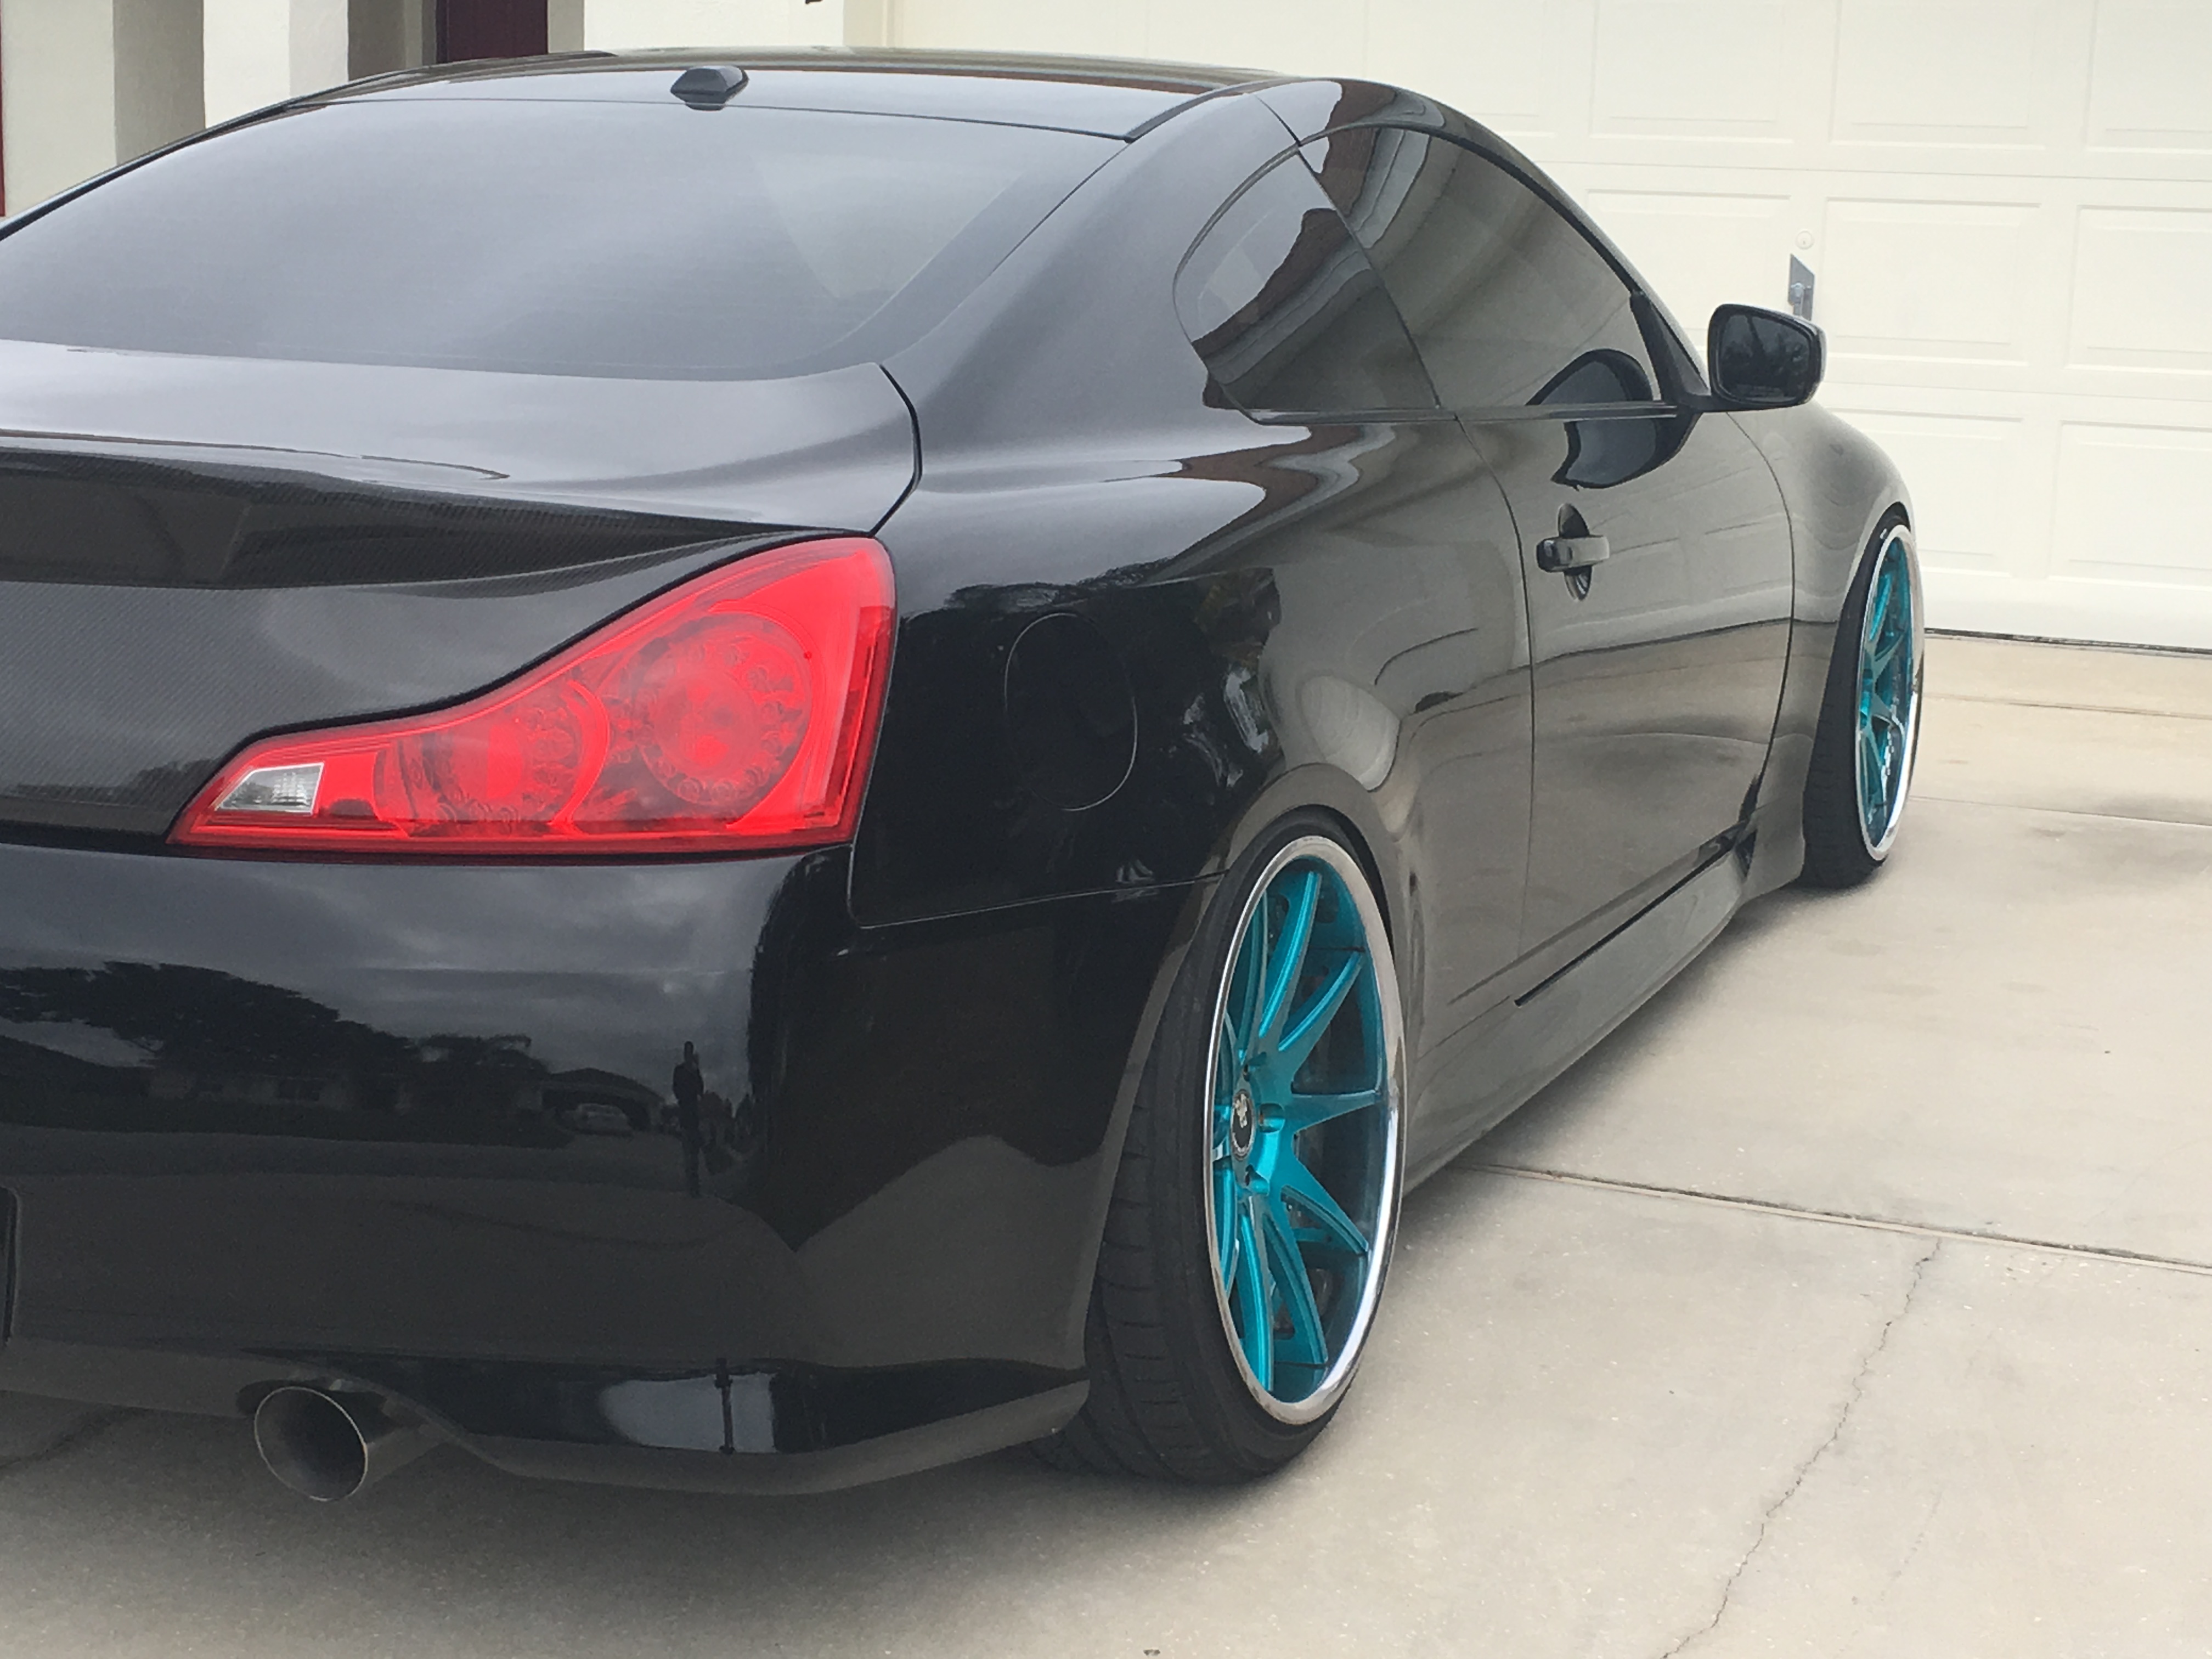 For Sale 2008 infiniti g37s 6-spd manual and heavily modded - MyG37